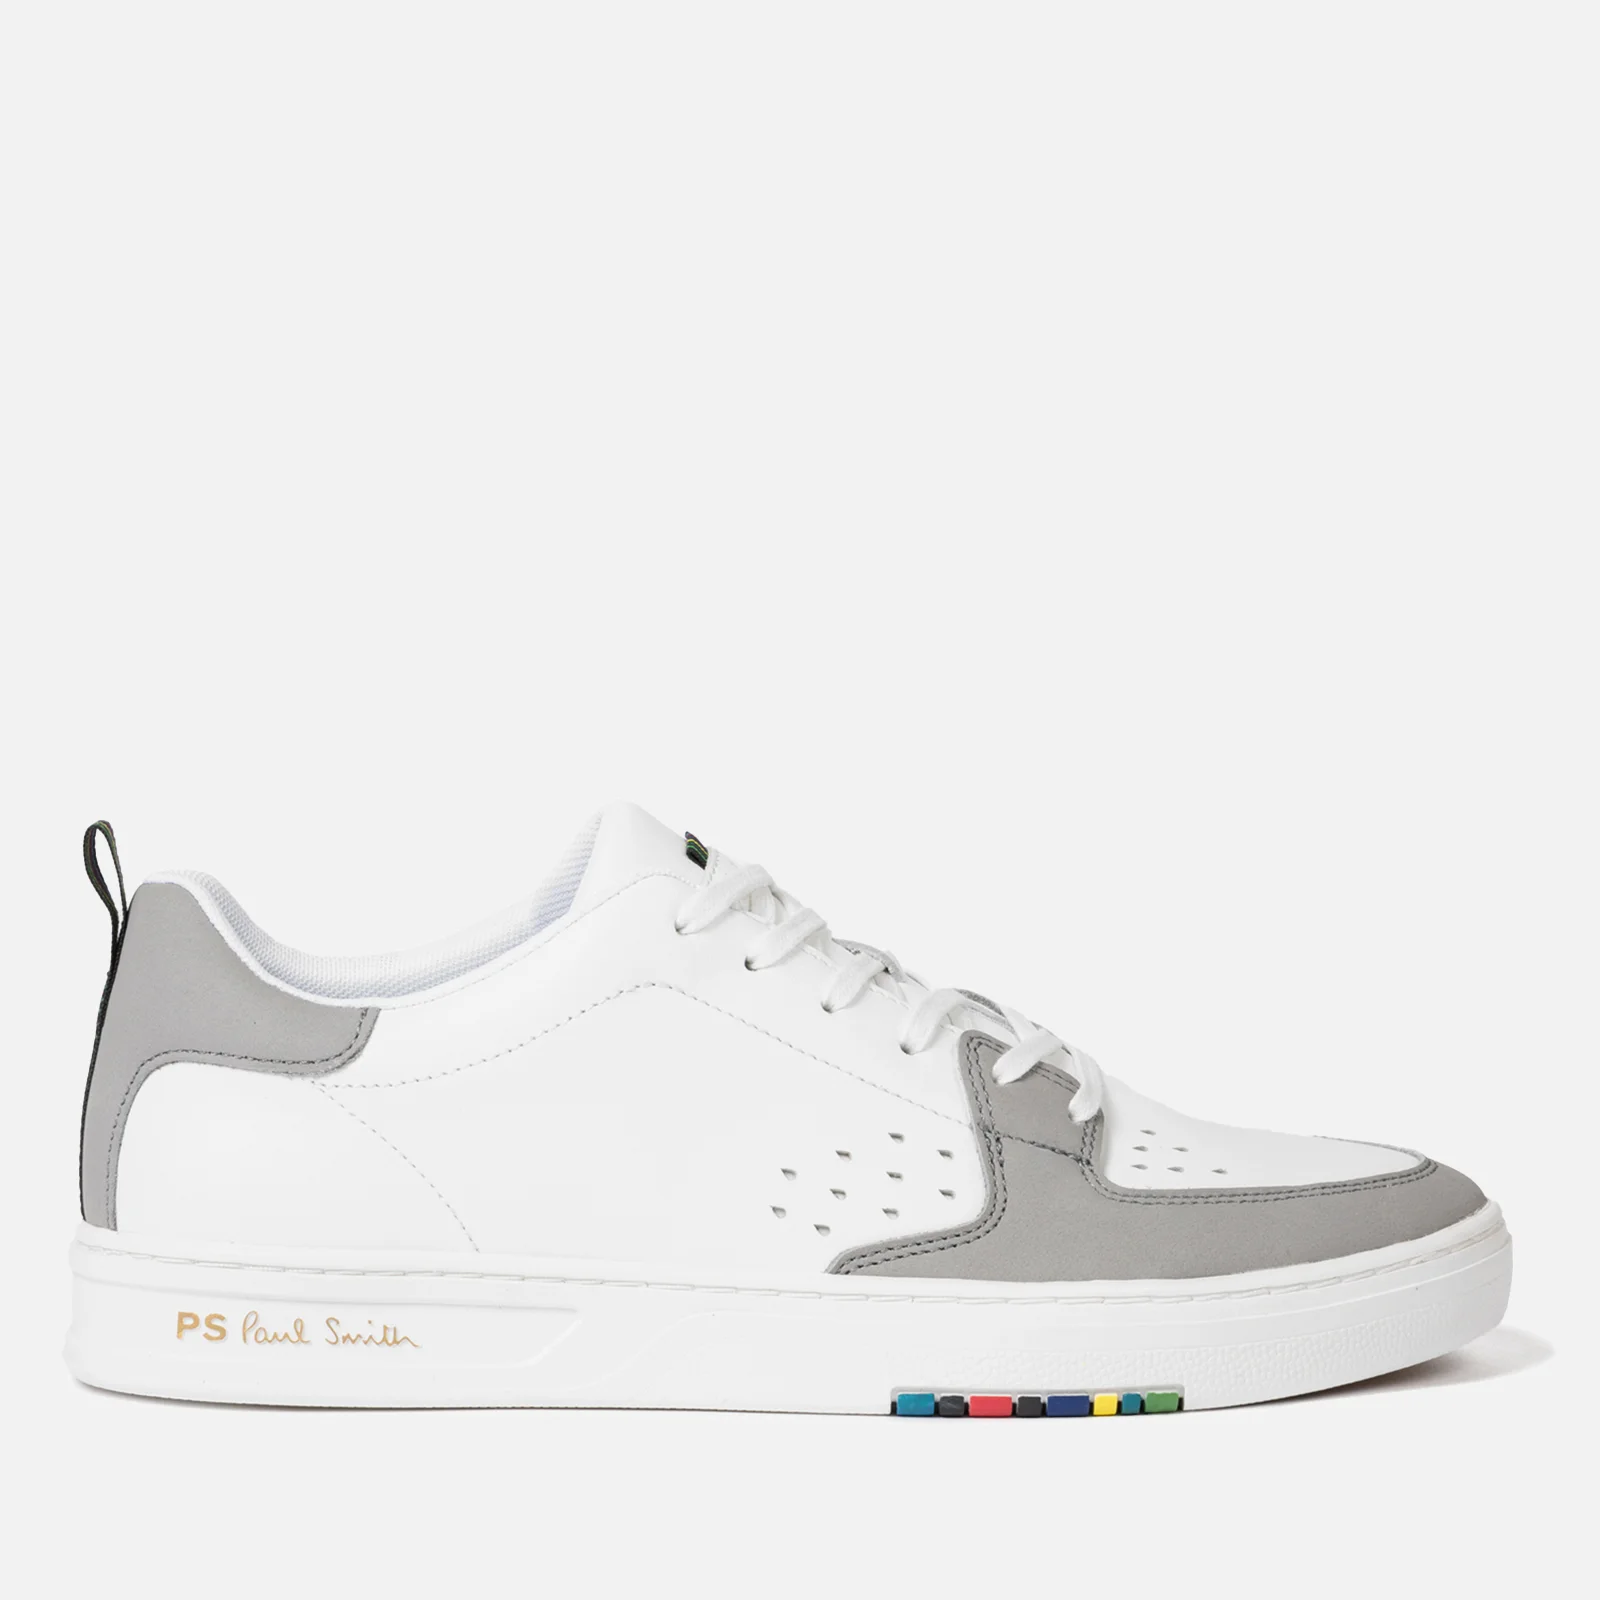 PS Paul Smith Men's Cosmo Leather Basket Trainers Image 1